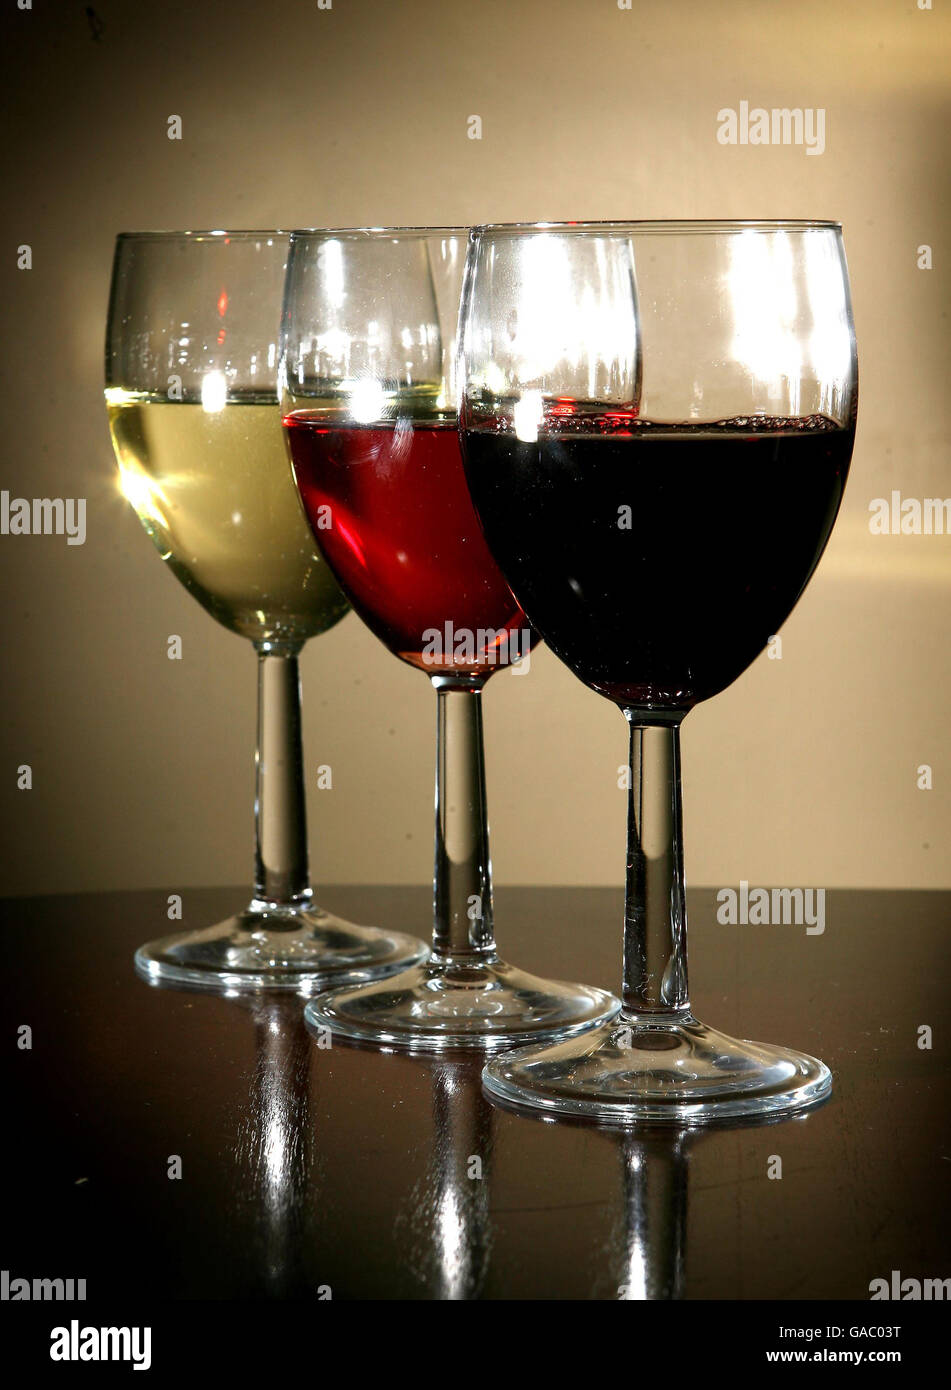 Generic image of wine filled glasses. Experts have warned of the dangers of routine over-consumption of alcohol as new figures were published showing people in relatively affluent areas are more likely to be drinking at levels considered 'hazardous' to health. Stock Photo